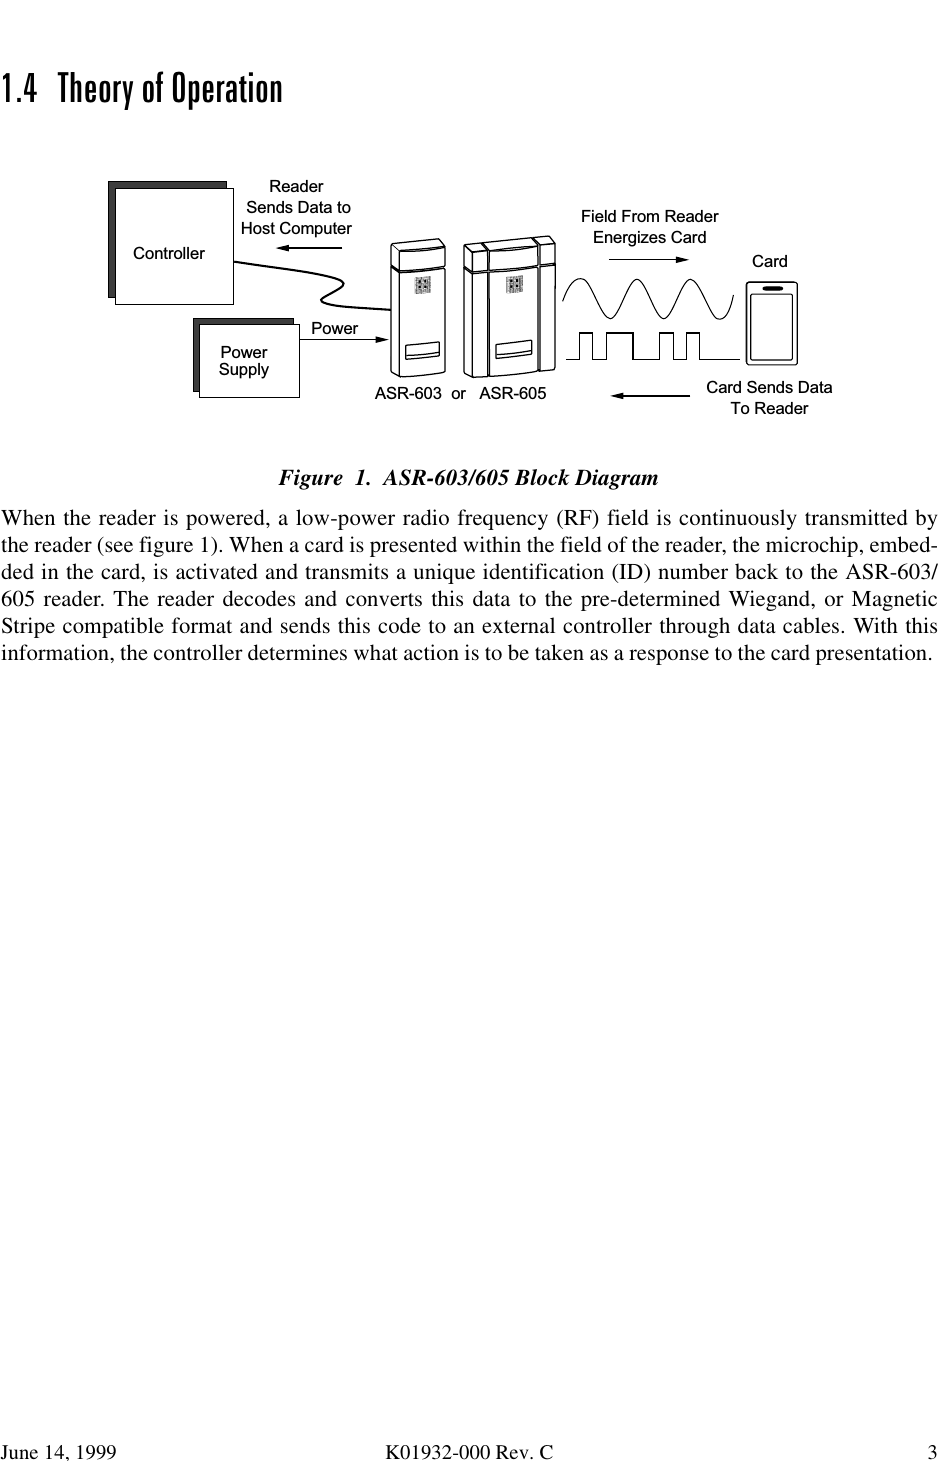 June 14, 1999 K01932-000 Rev. C 3 7KHRU\RI2SHUDWLRQFigure  1.  ASR-603/605 Block DiagramWhen the reader is powered, a low-power radio frequency (RF) field is continuously transmitted bythe reader (see figure 1). When a card is presented within the field of the reader, the microchip, embed-ded in the card, is activated and transmits a unique identification (ID) number back to the ASR-603/605 reader. The reader decodes and converts this data to the pre-determined Wiegand, or MagneticStripe compatible format and sends this code to an external controller through data cables. With thisinformation, the controller determines what action is to be taken as a response to the card presentation. CardField From  R eaderEnergizes C ardC ard S ends D ataTo R eaderR eader S ends D ata toH o s t C o m p u te rPowerPowerSupplyC o n tr o lle rA S R -6 0 3   o r   A S R -6 0 5